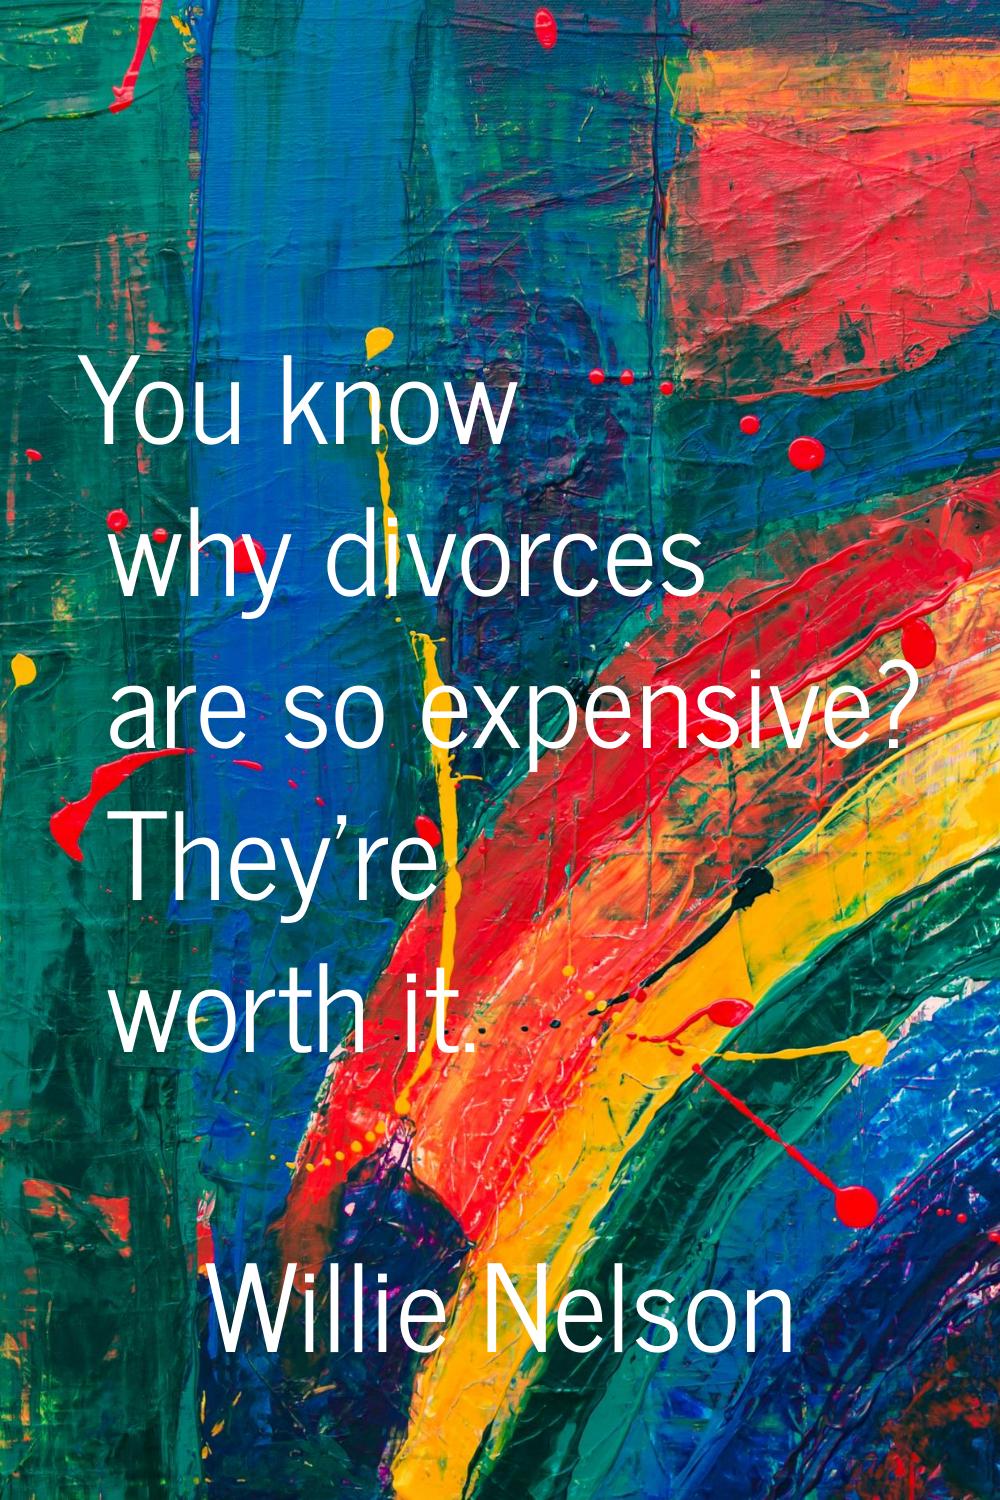 You know why divorces are so expensive? They're worth it.